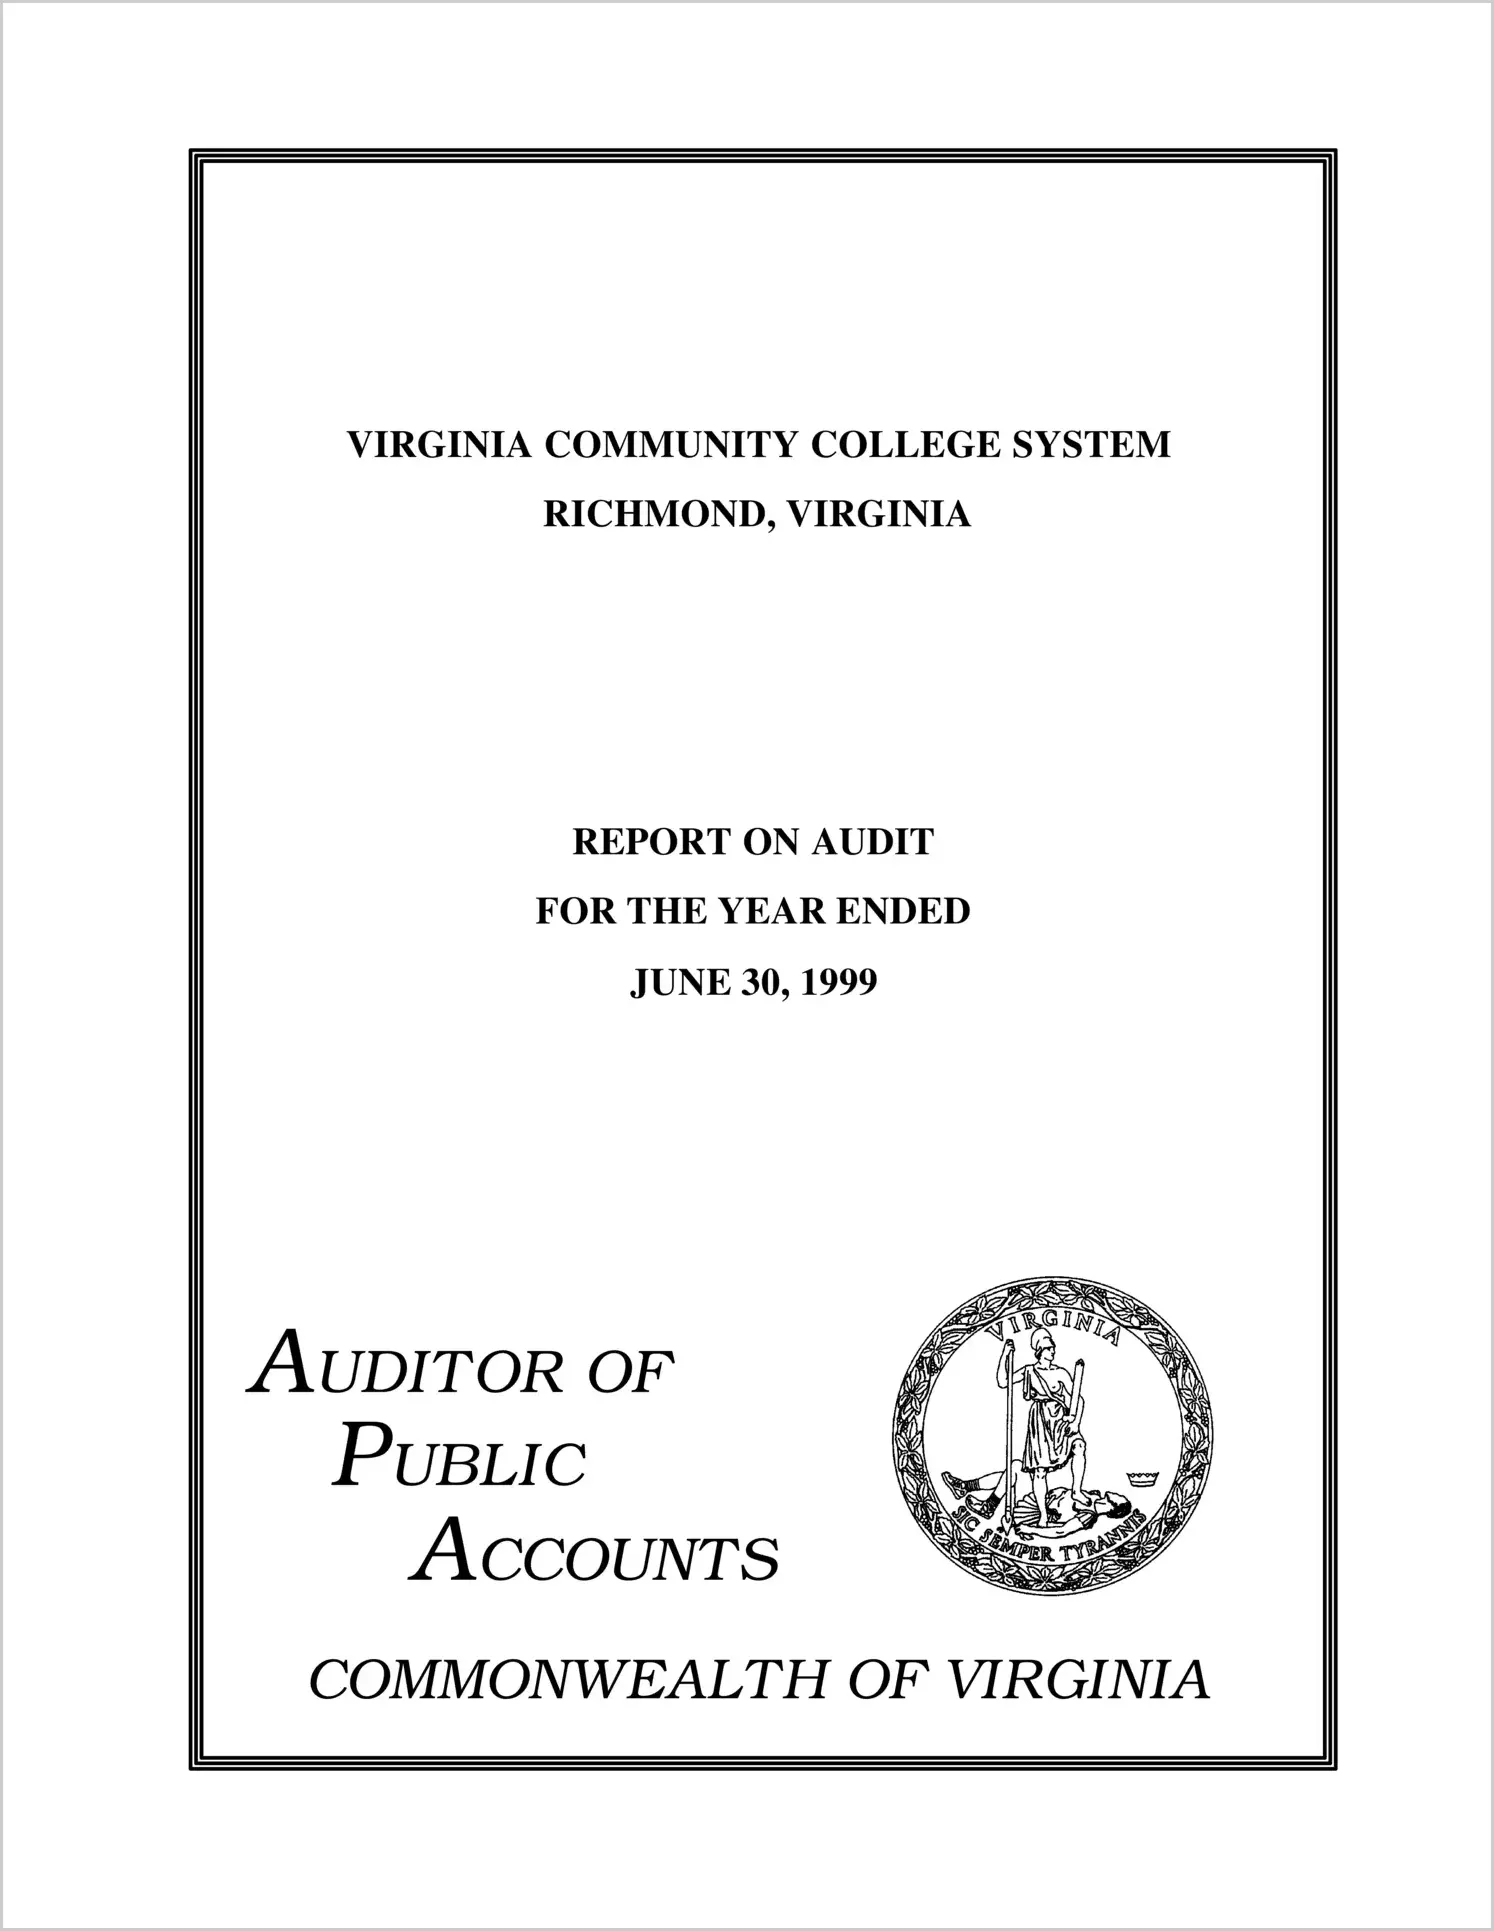 Virginia Community College System for the year ended June 30, 1999